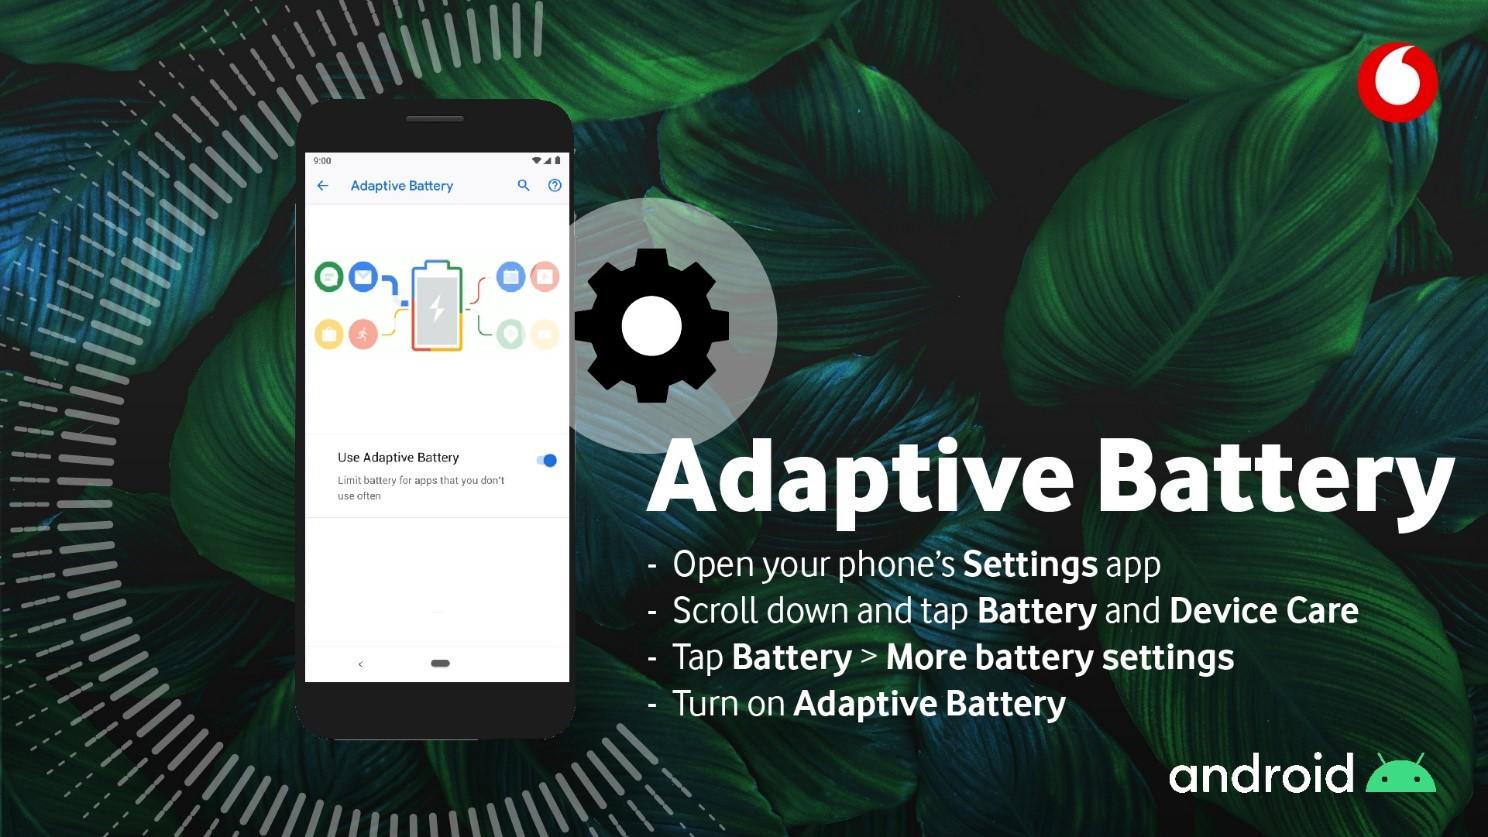 Information about adaptive battery with Android.